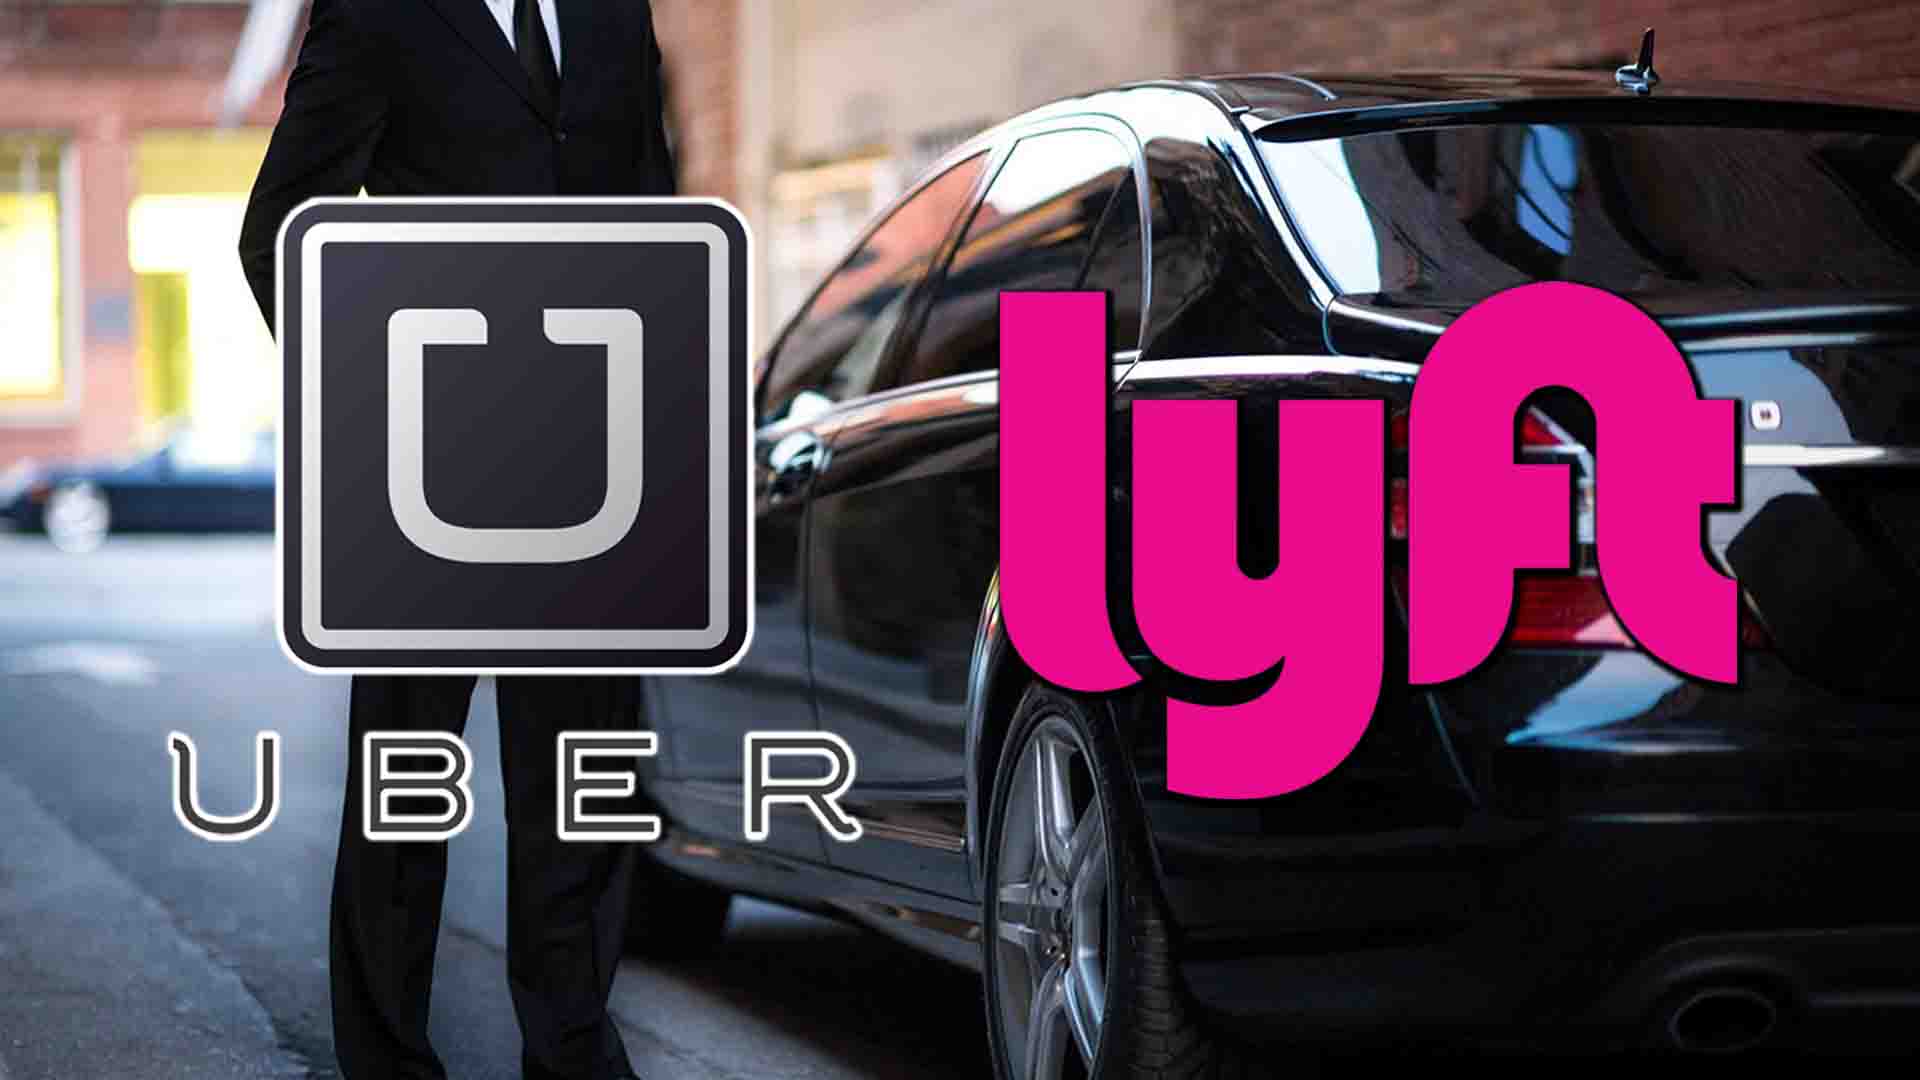 Image: Lyft, Uber get 11th hour reprieve from California court order demanding they convert all drivers to employees